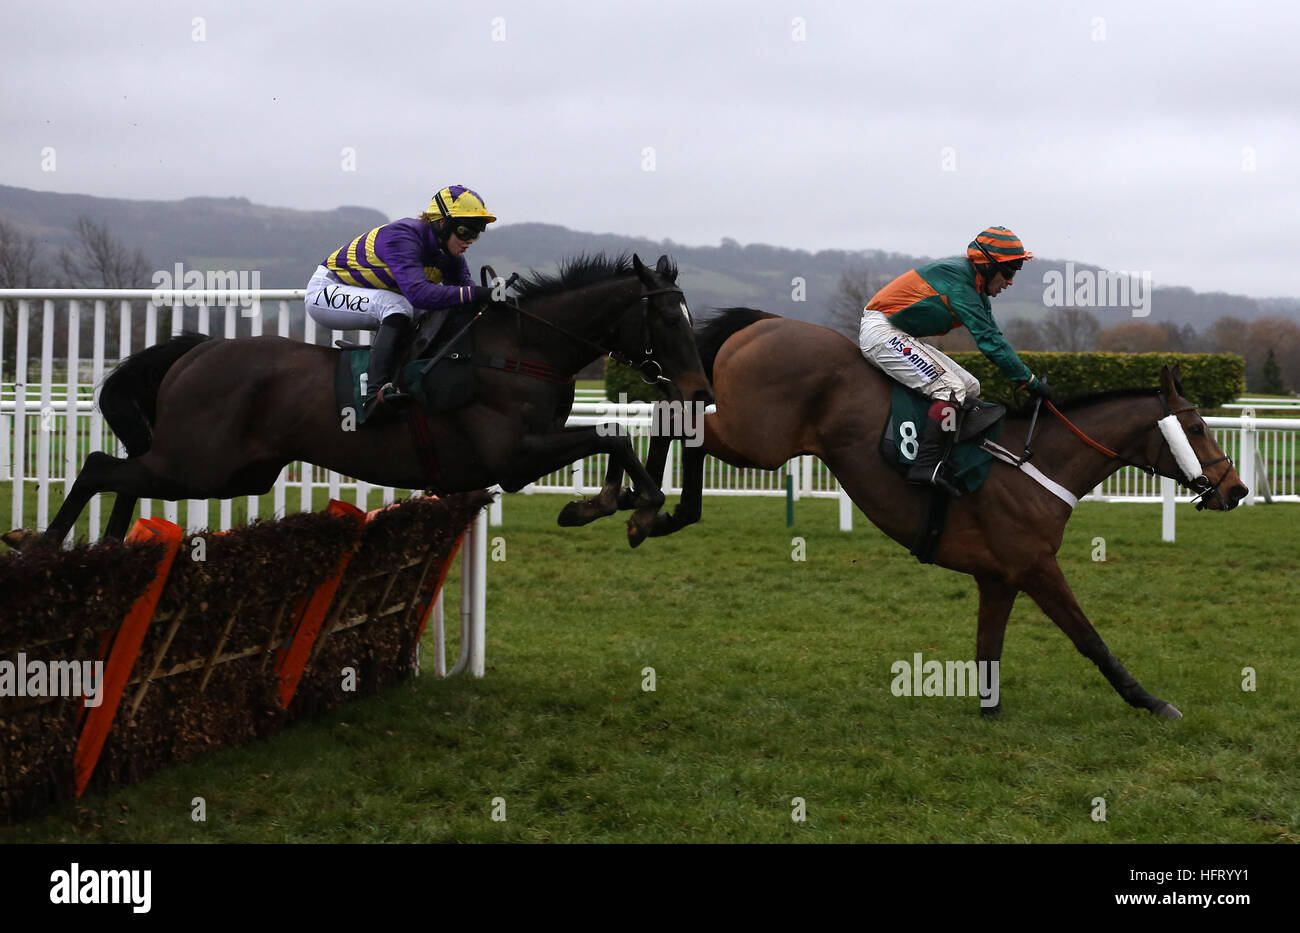 Agrapart ridden by Lizzie Kelly trails Cole Harden ridden by Gavin Sheehan over an early flight before going on to win The Dornan Engineering Relkeel Handicap Hurdle Race run at Cheltenham Racecourse. Stock Photo